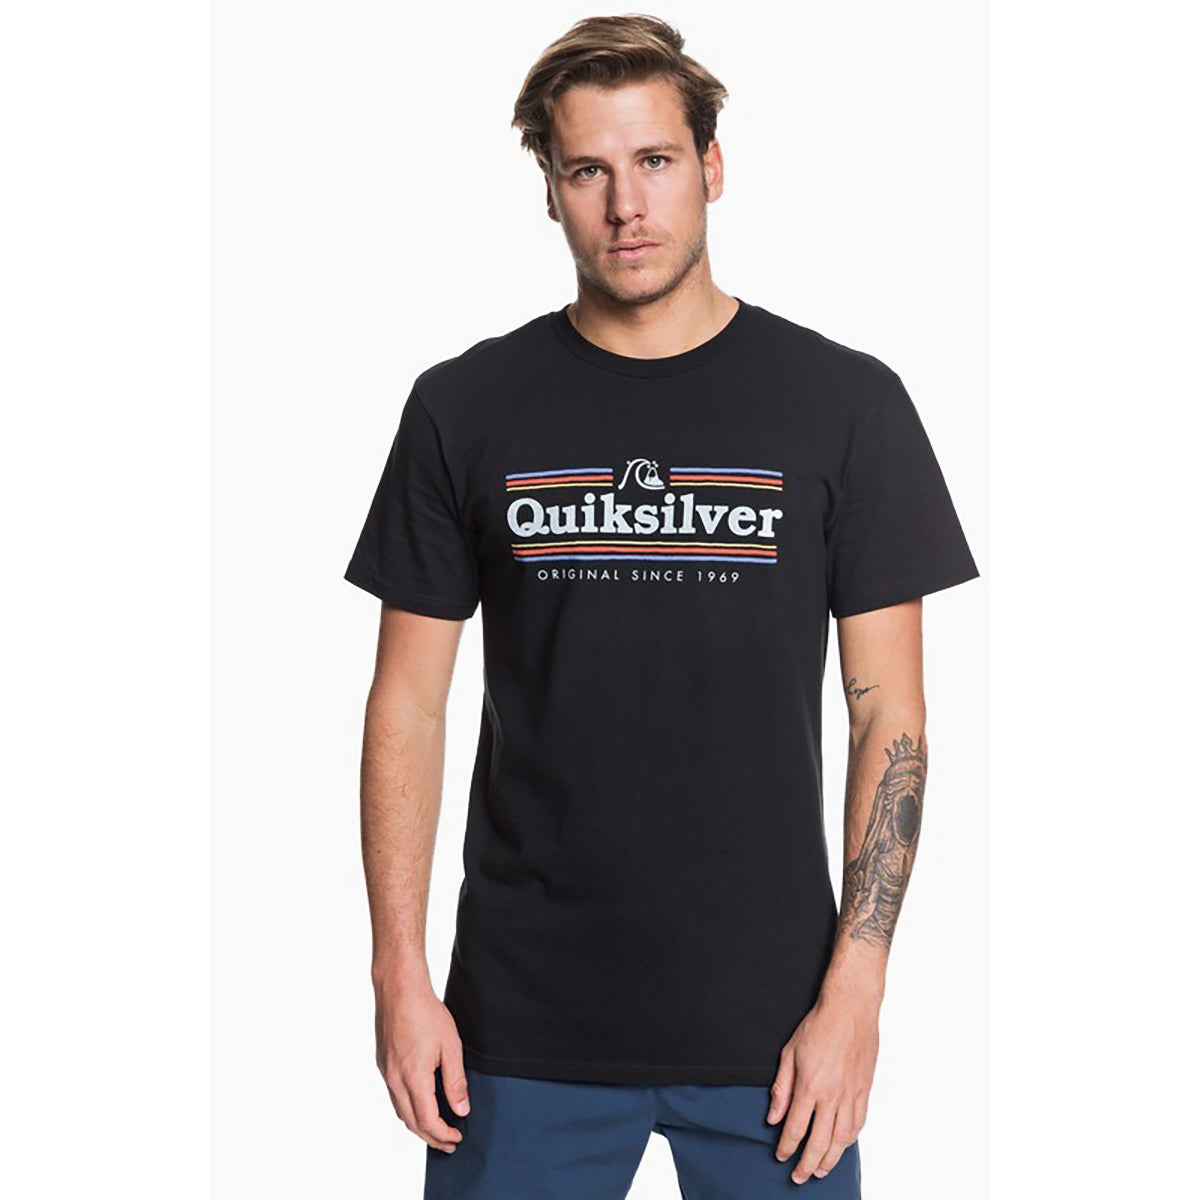 Quiksilver Get Buzzy Mens Short-Sleeve Shirts (BRAND NEW)